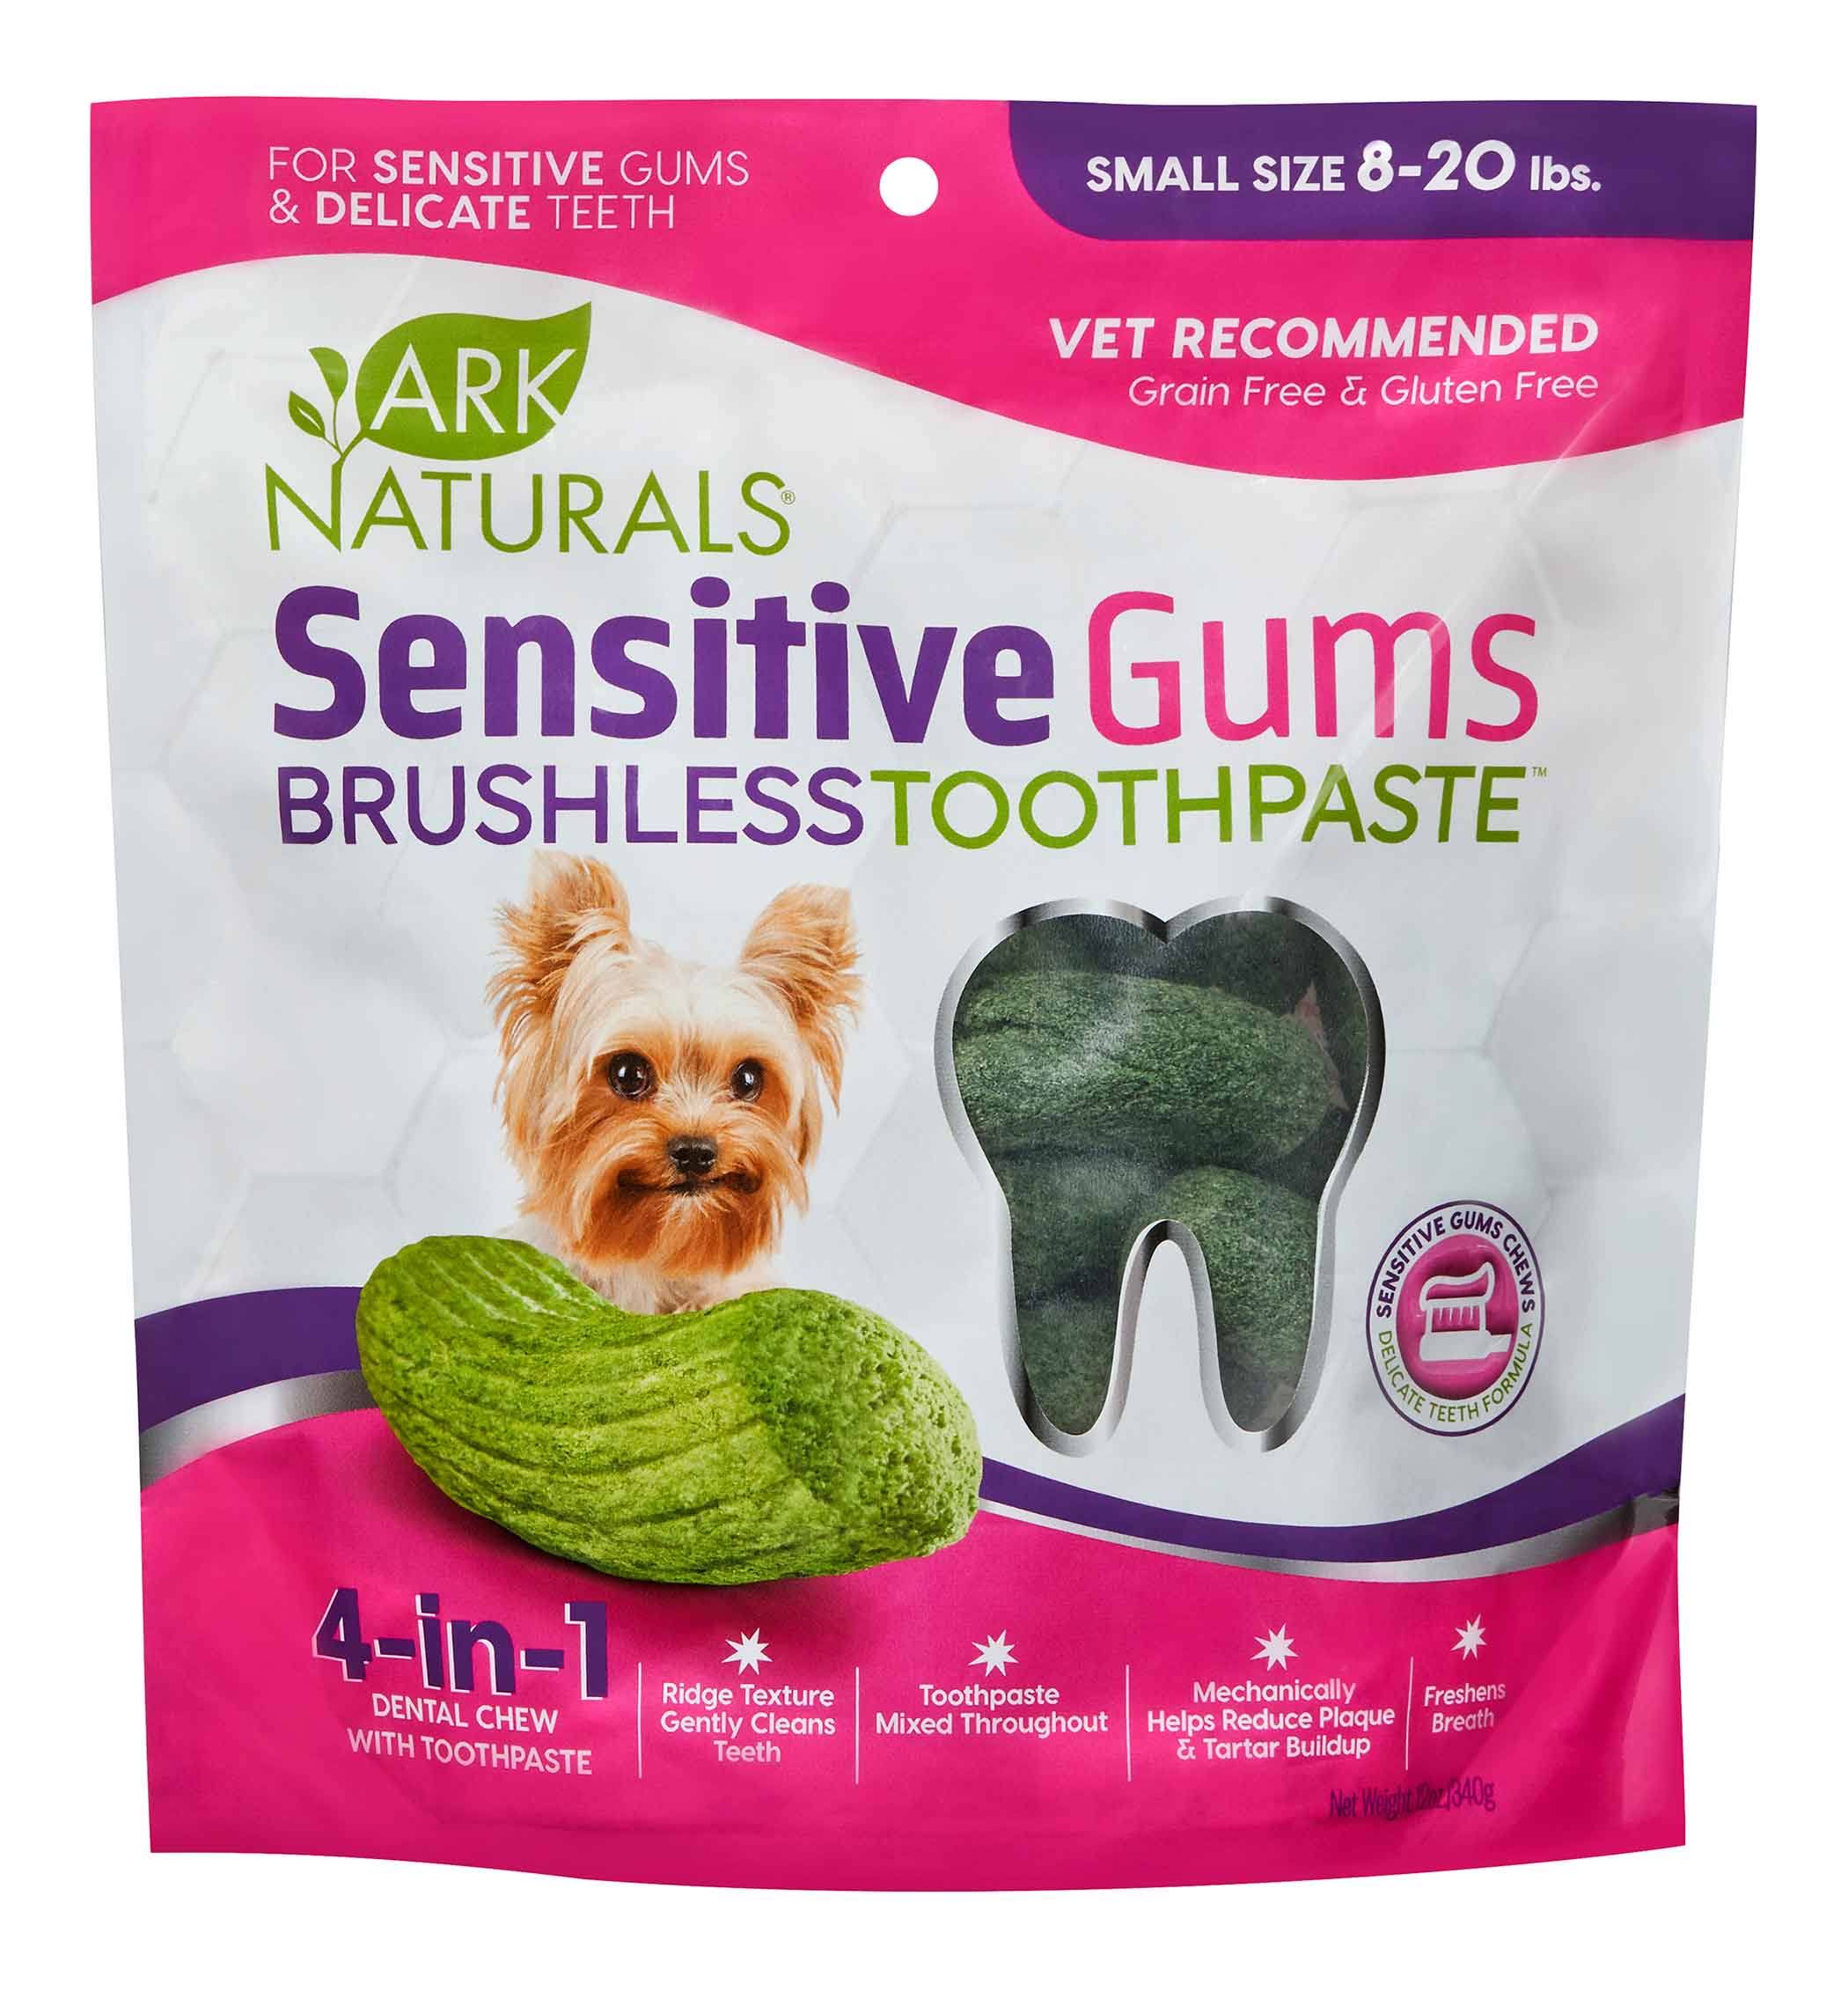 Ark Naturals Sensitive Gums Brushless Toothpaste Small - 4.1 oz